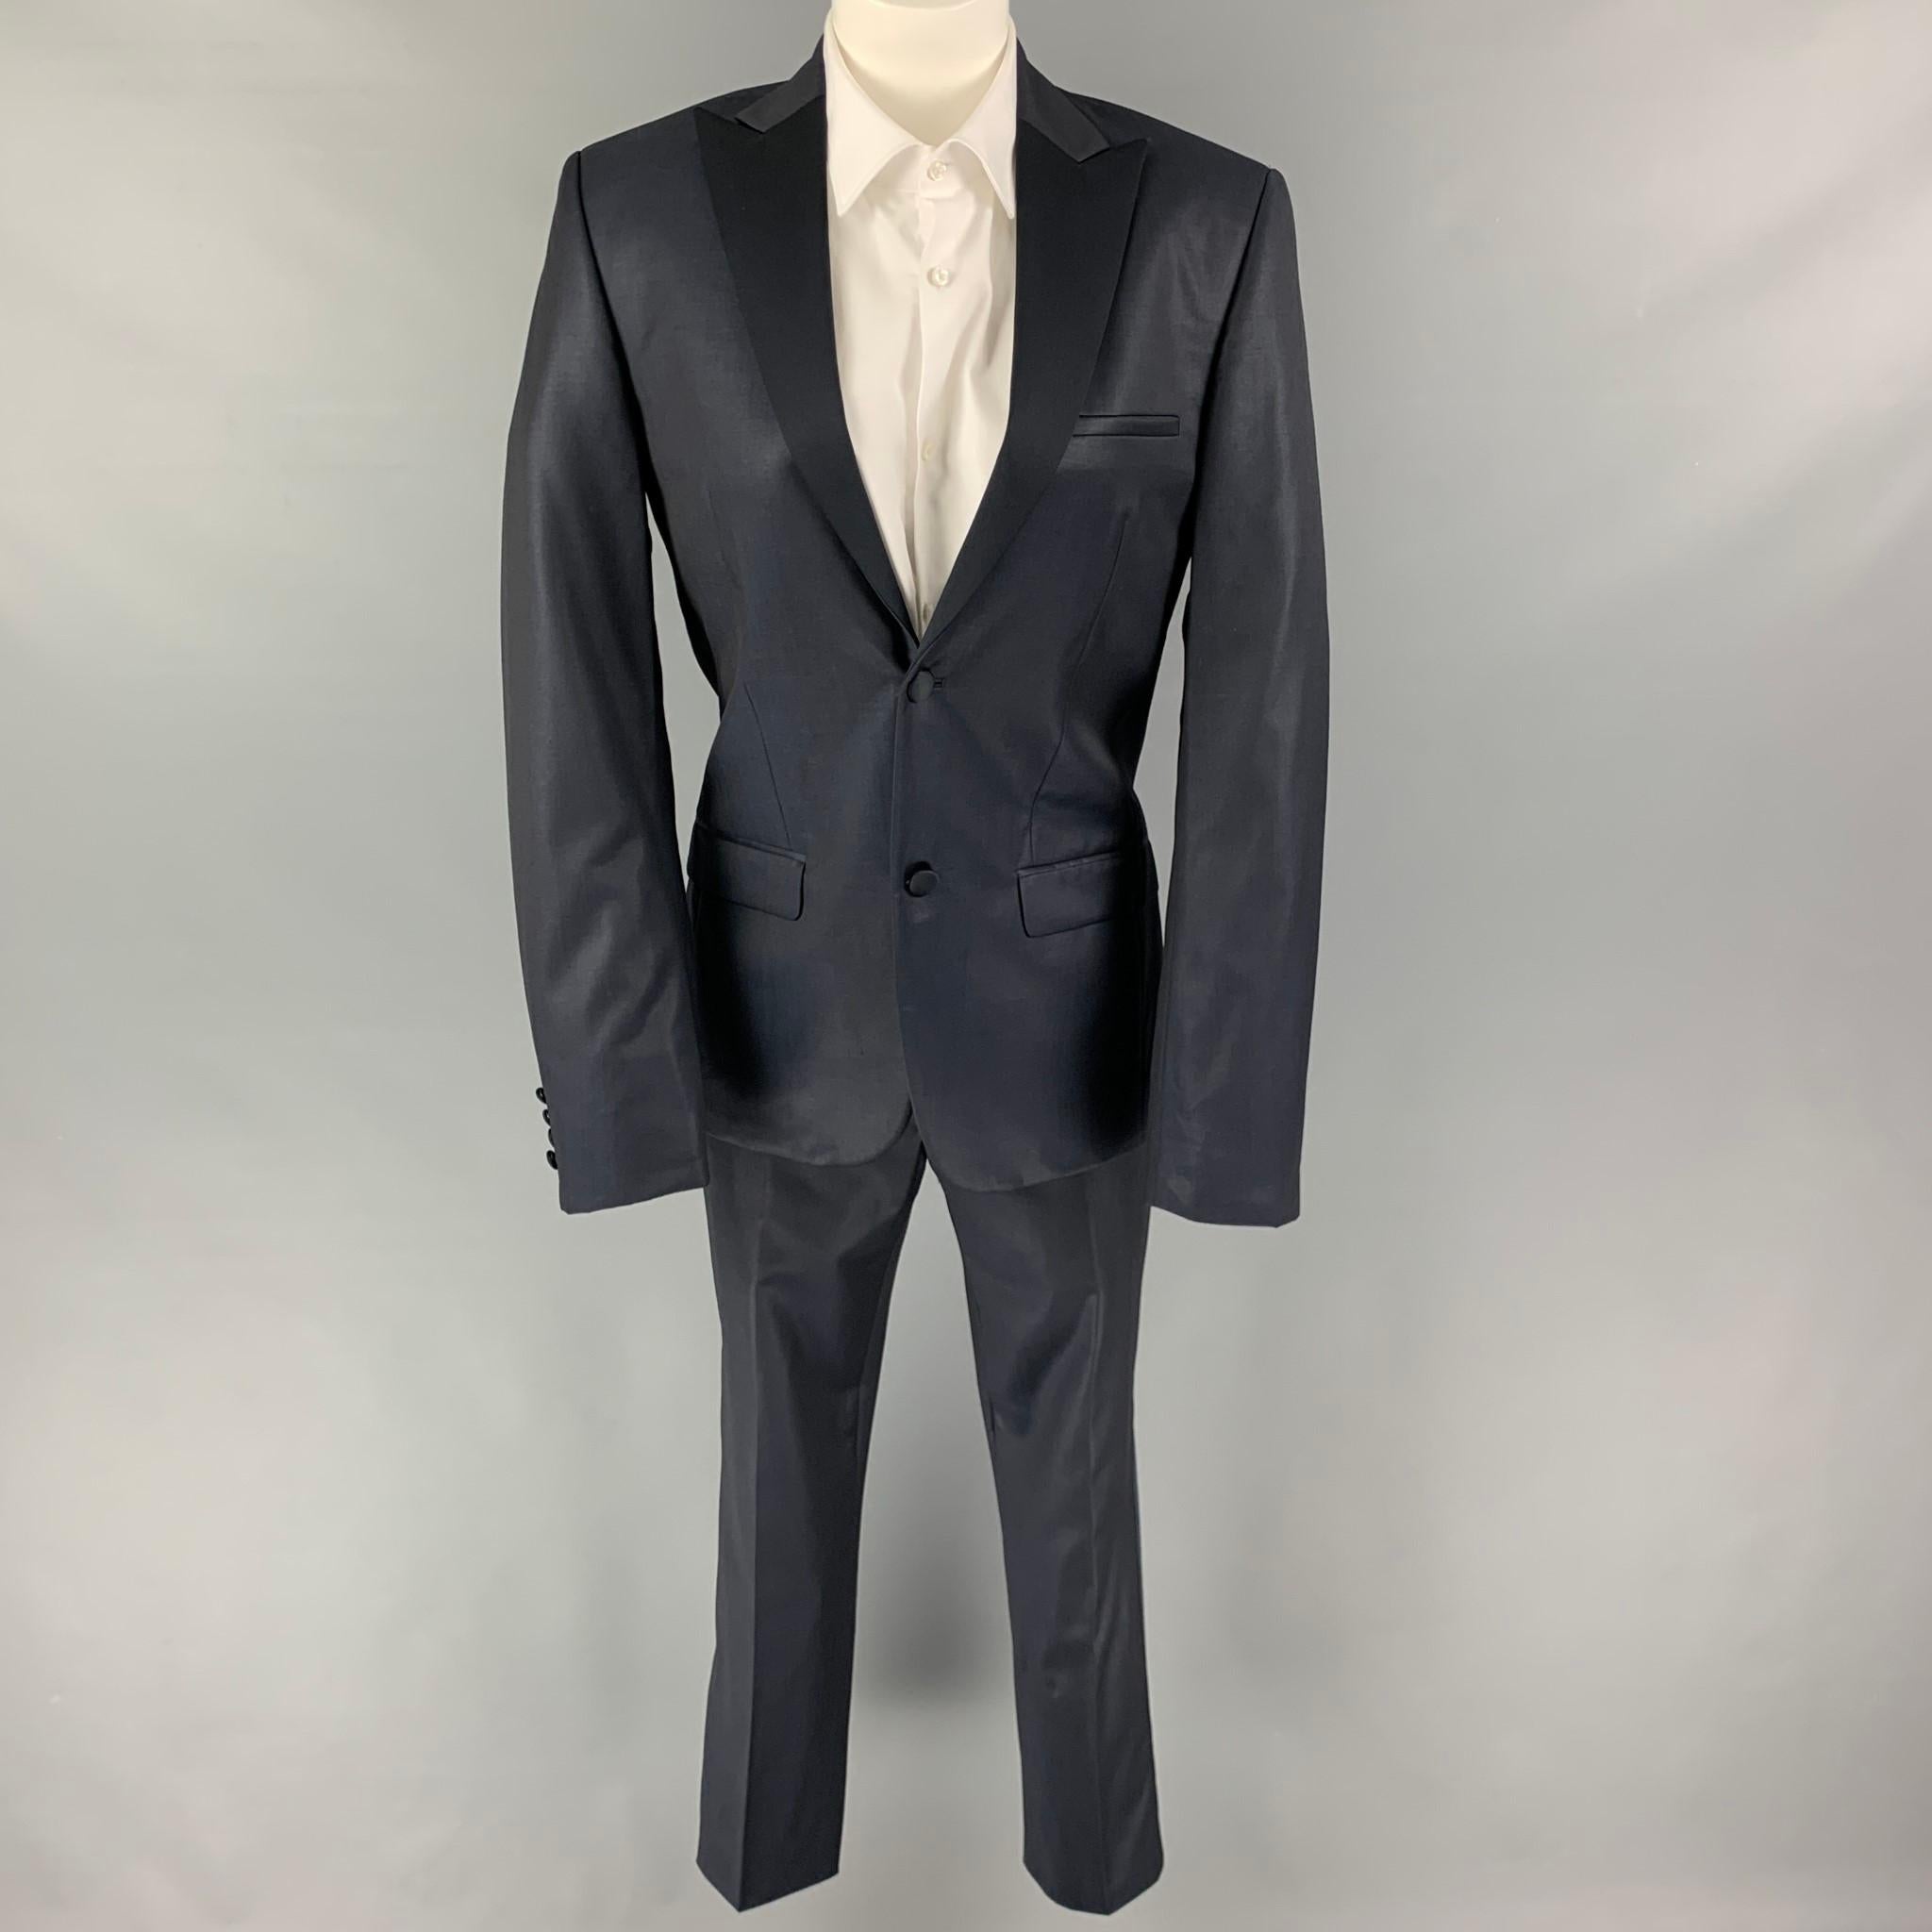 CALVIN KLEIN COLLECTION suit comes in a navy & black wool with a full liner and includes a single breasted, double button sport coat with a peak lapel and matching flat front trousers.

Excellent Pre-Owned Condition.
Marked: